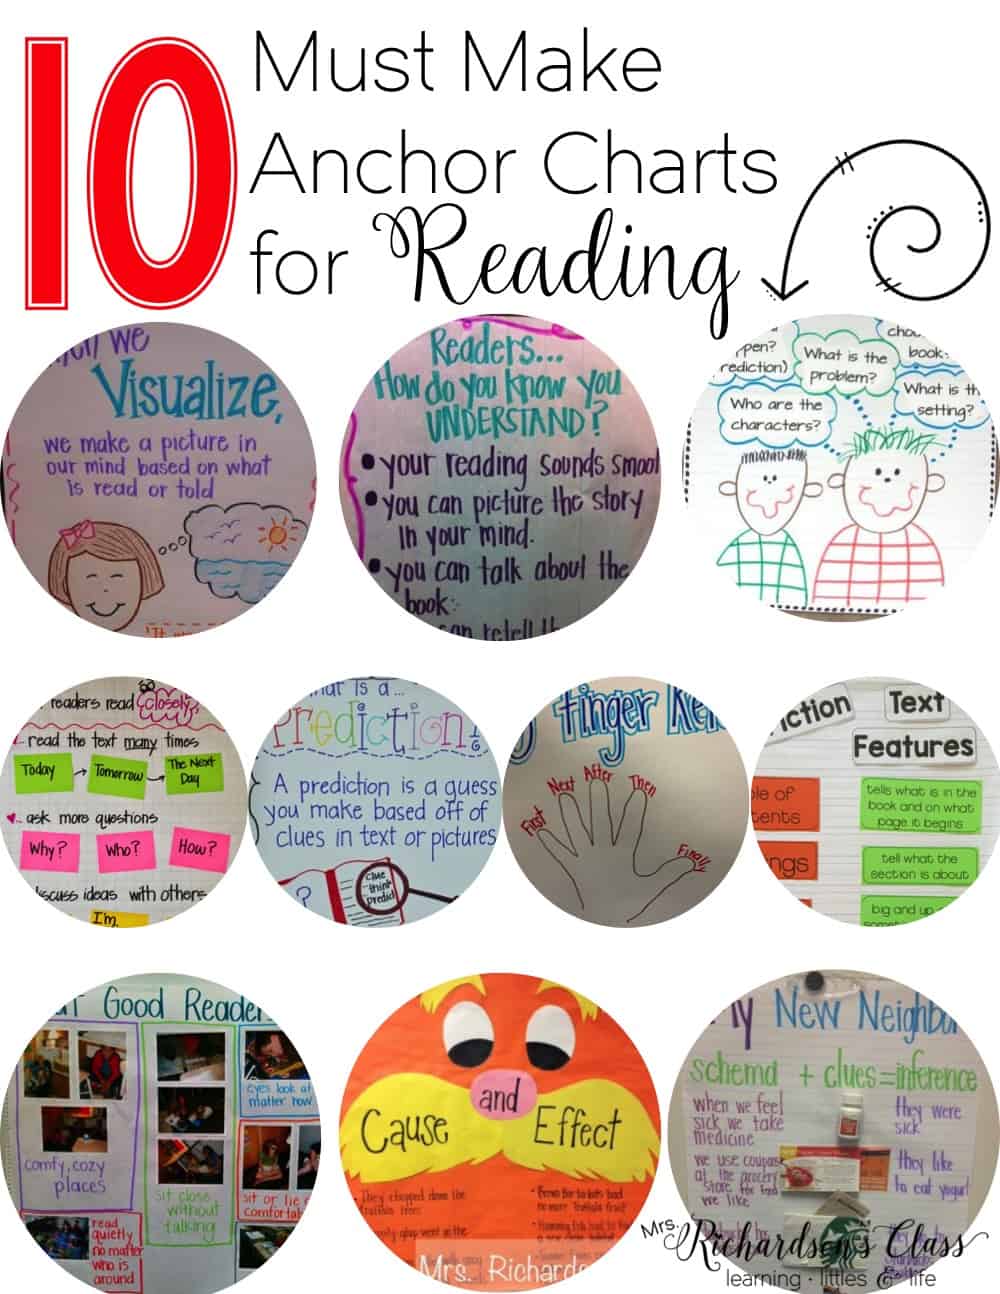 10 Must Make Anchor Charts for Reading Mrs. Richardson's Class